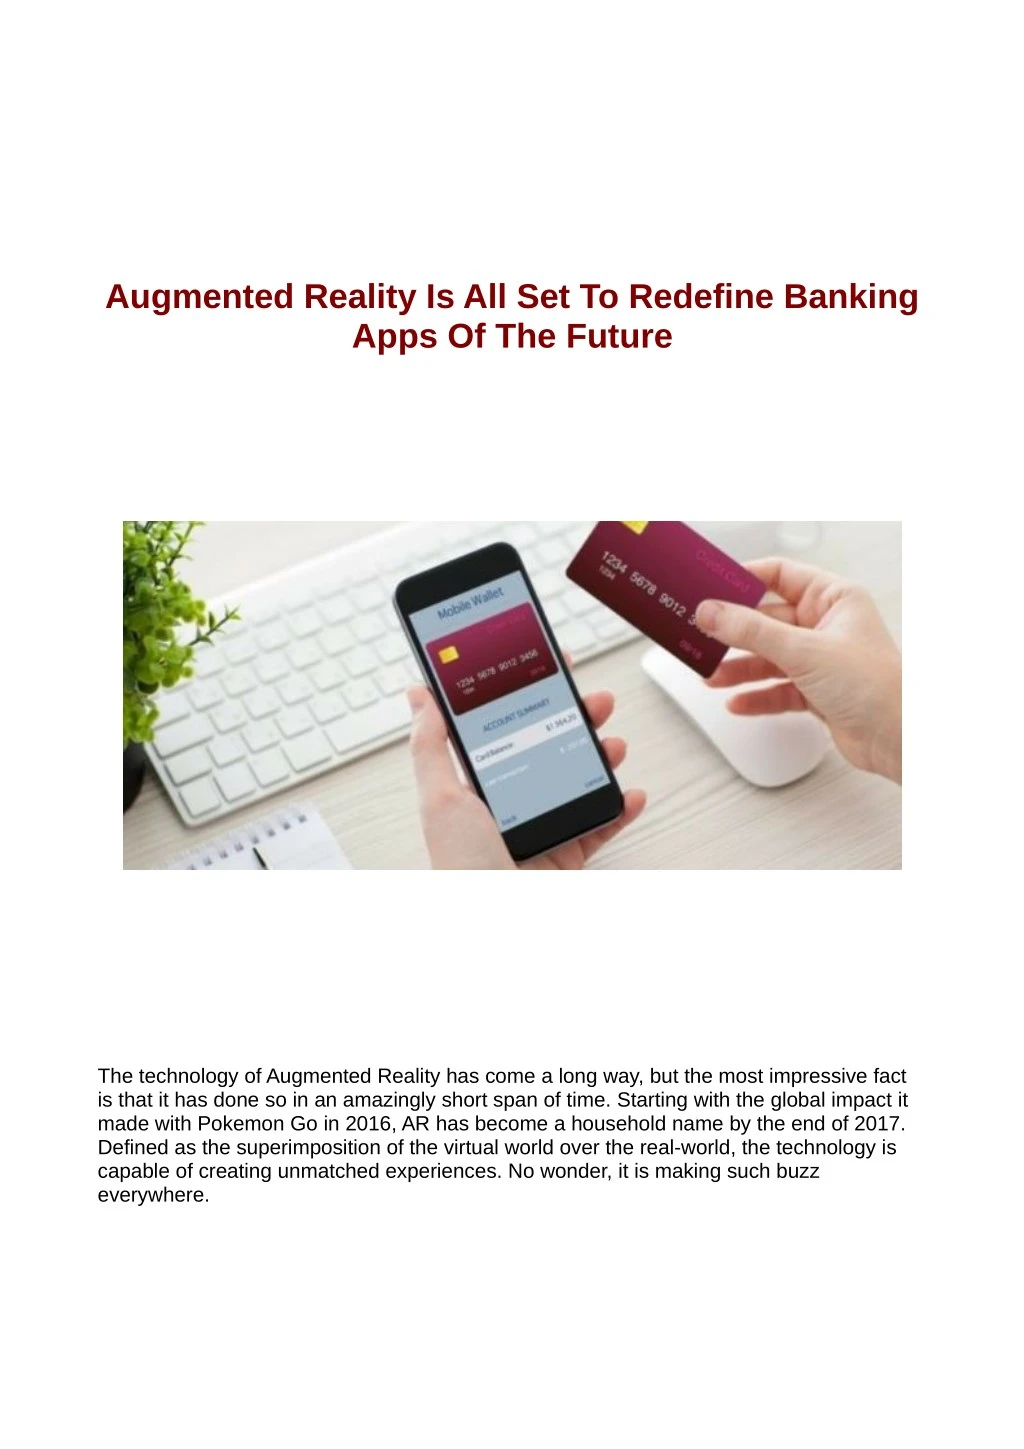 augmented reality is all set to redefine banking